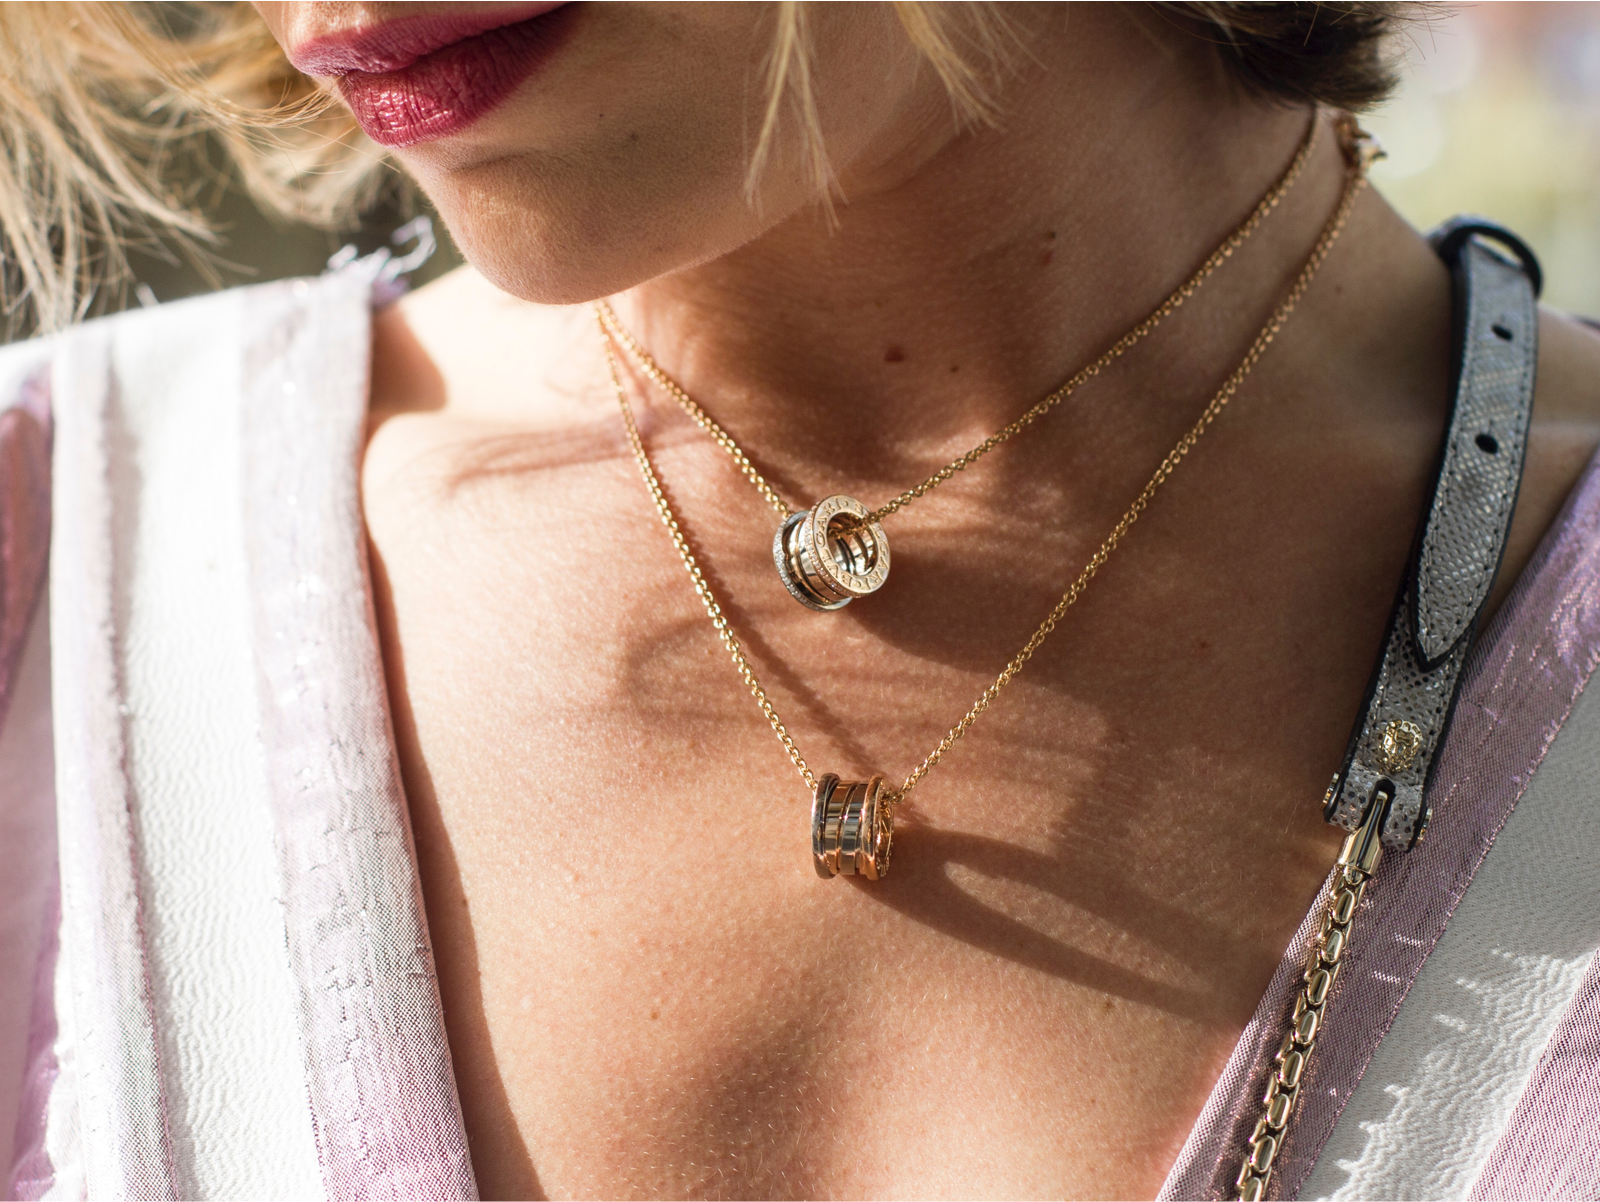 Two necklaces on a woman's neck